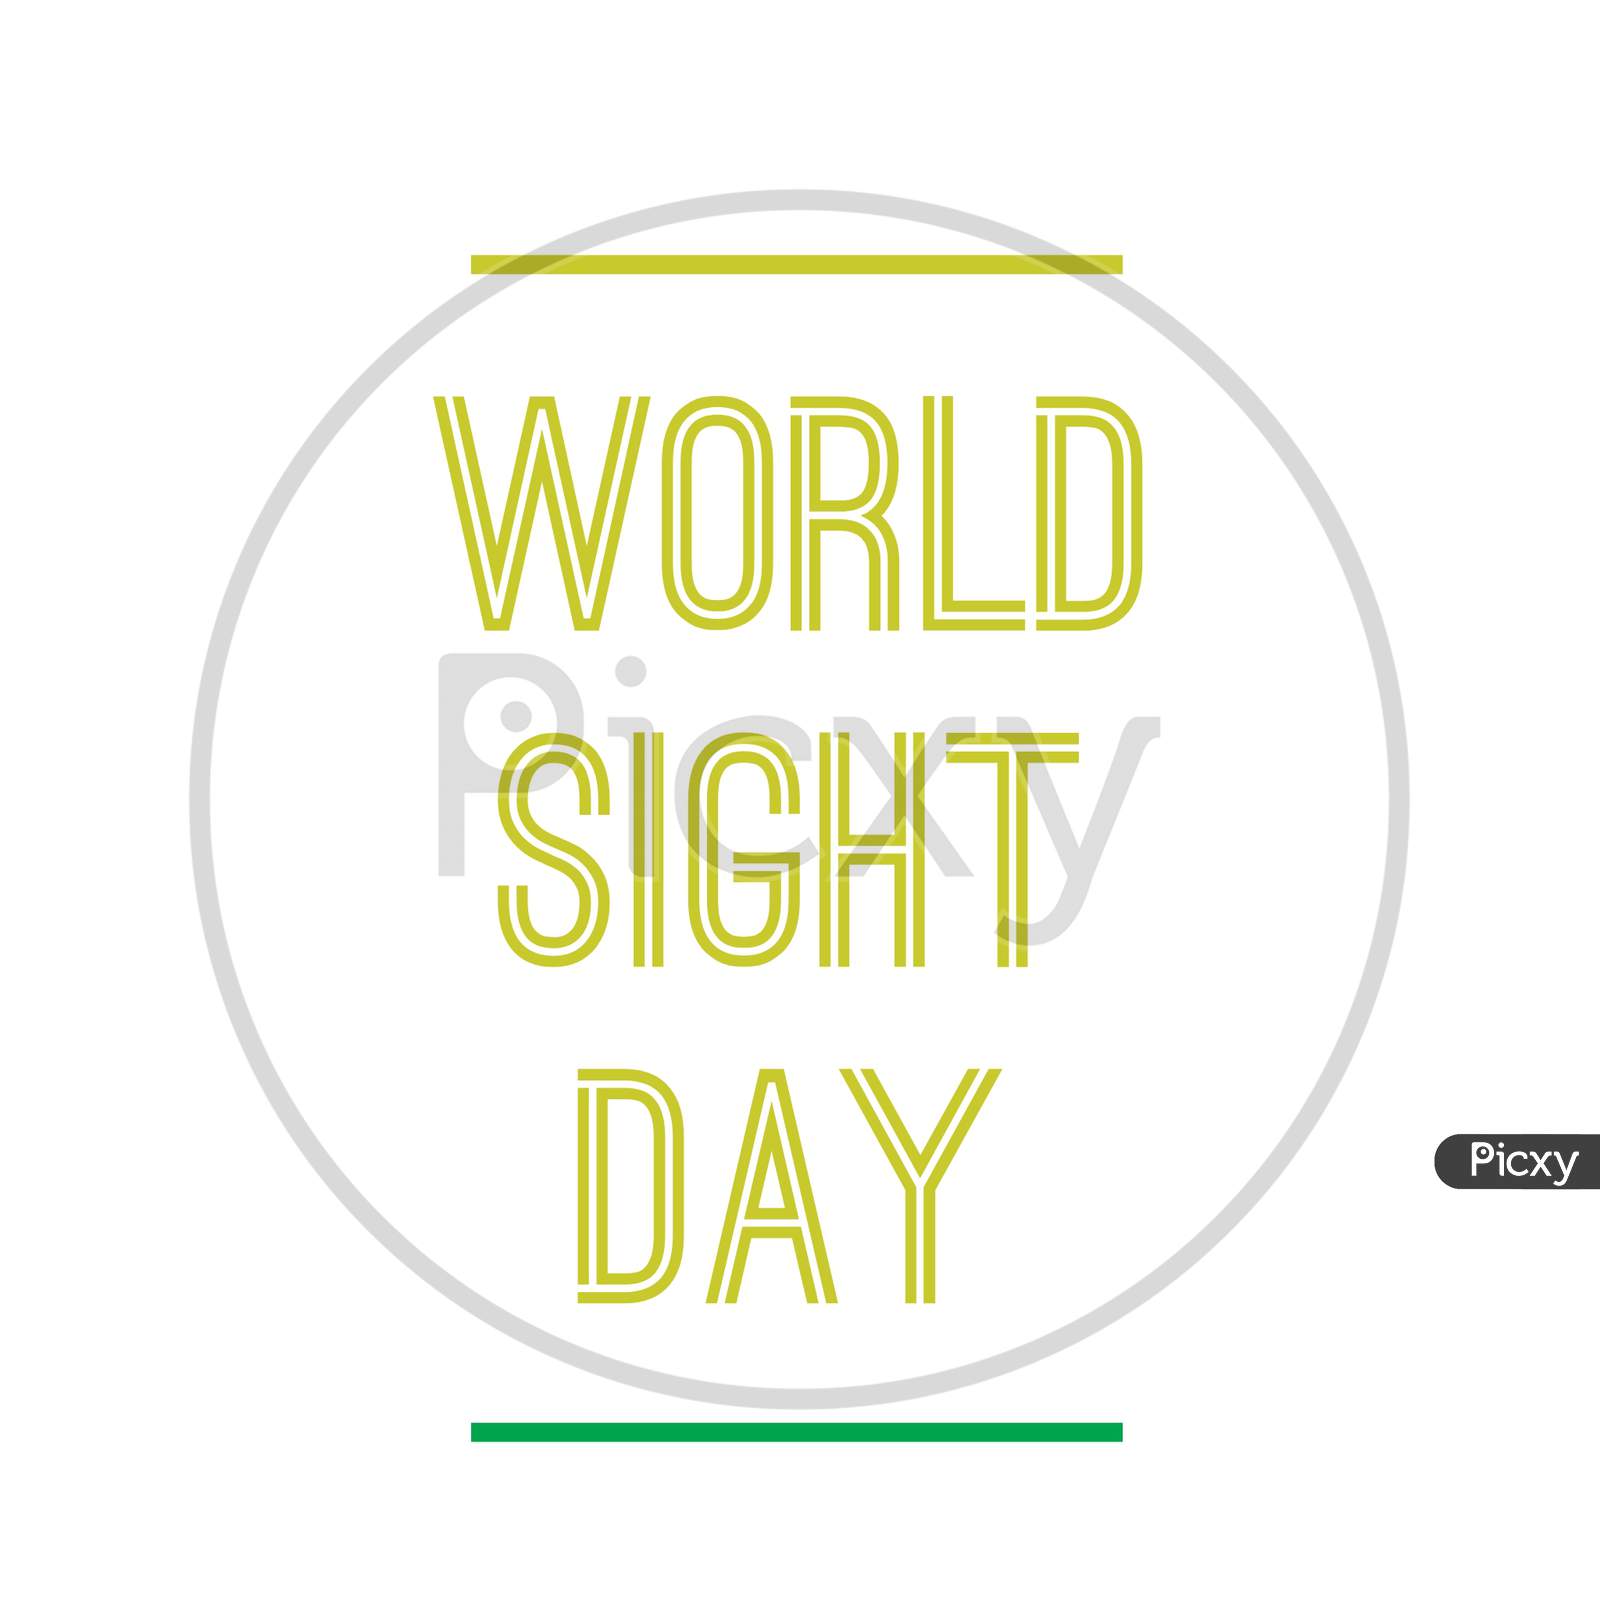 Image With Text "World Sight Day"